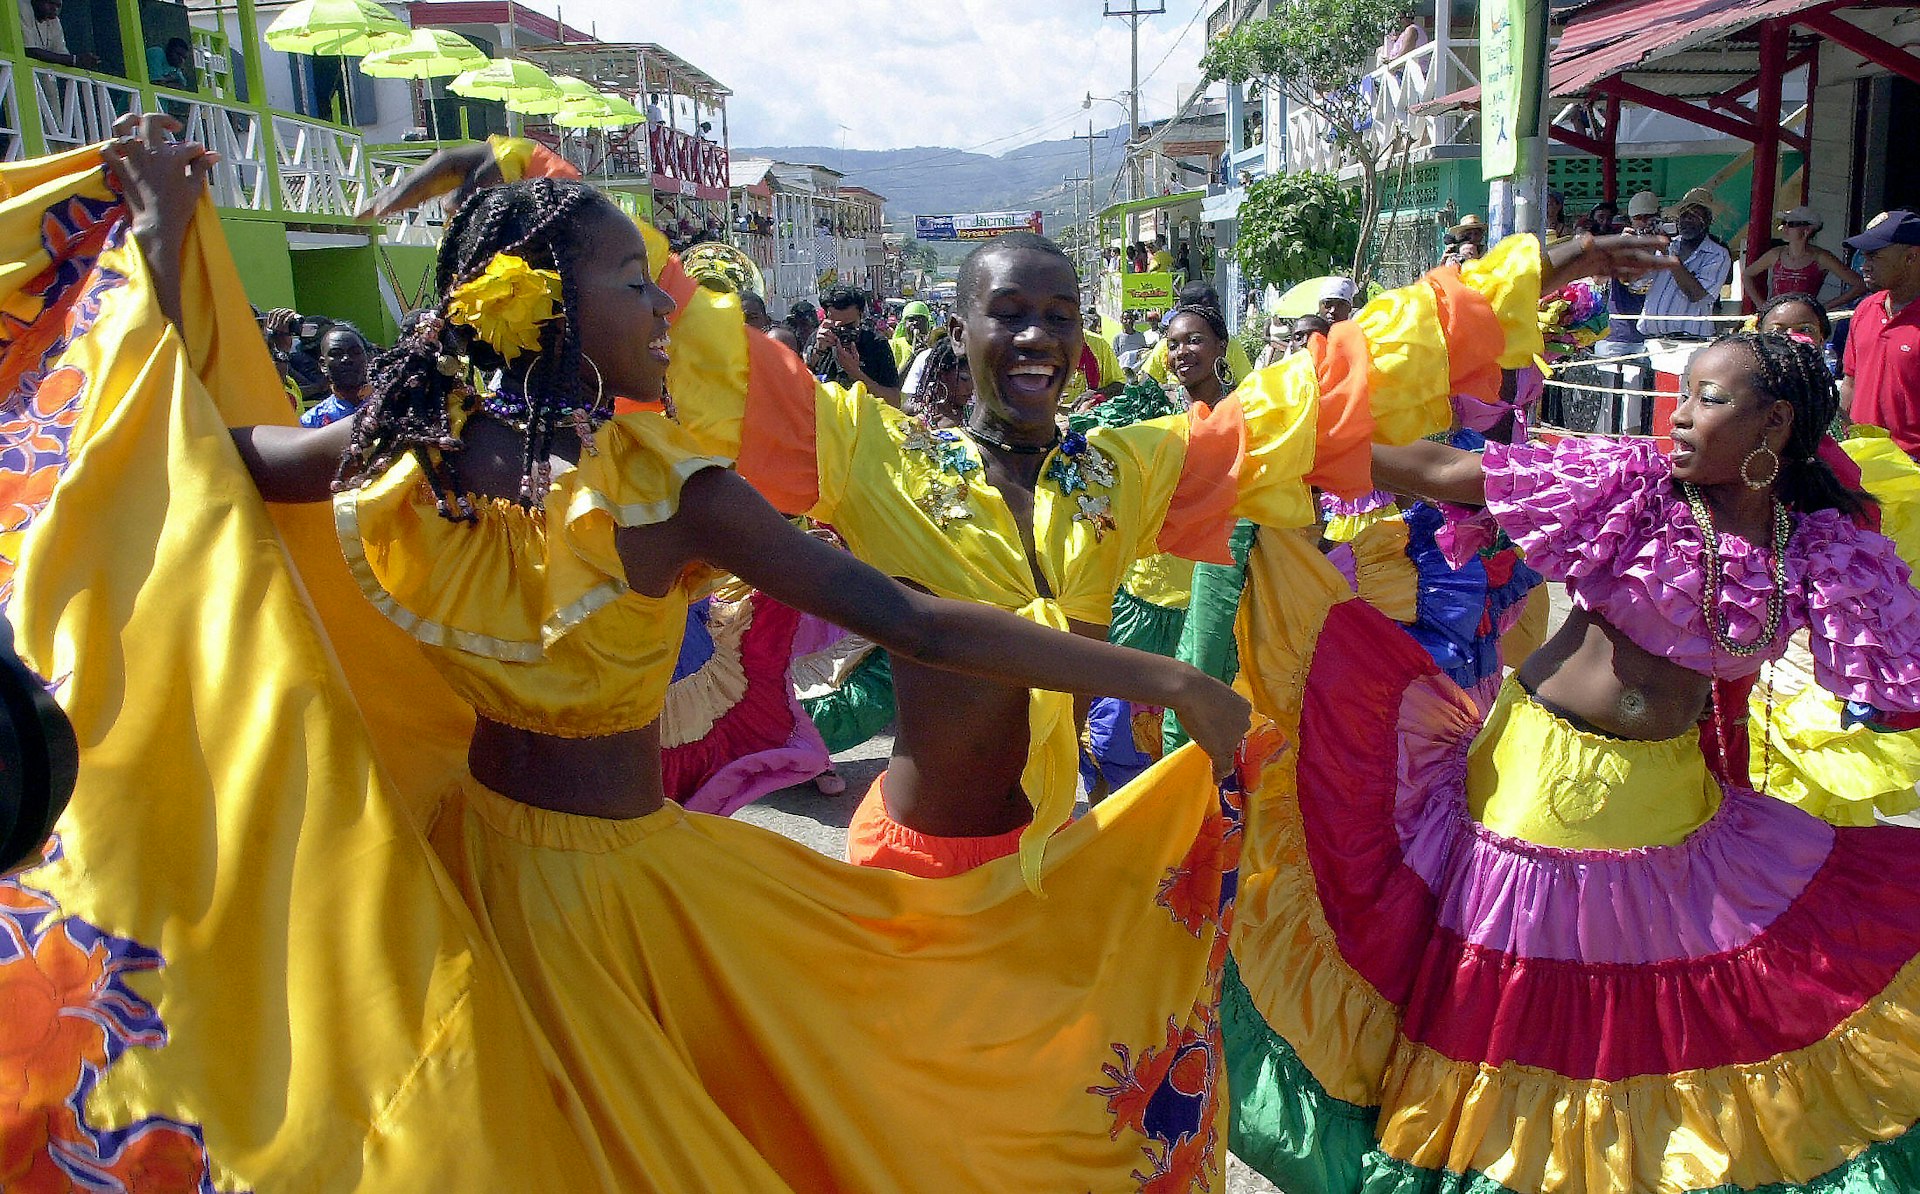 Haitians dance during the National Carnival in Jacmel. Image by © THONY BELIZAIRE / Getty Images